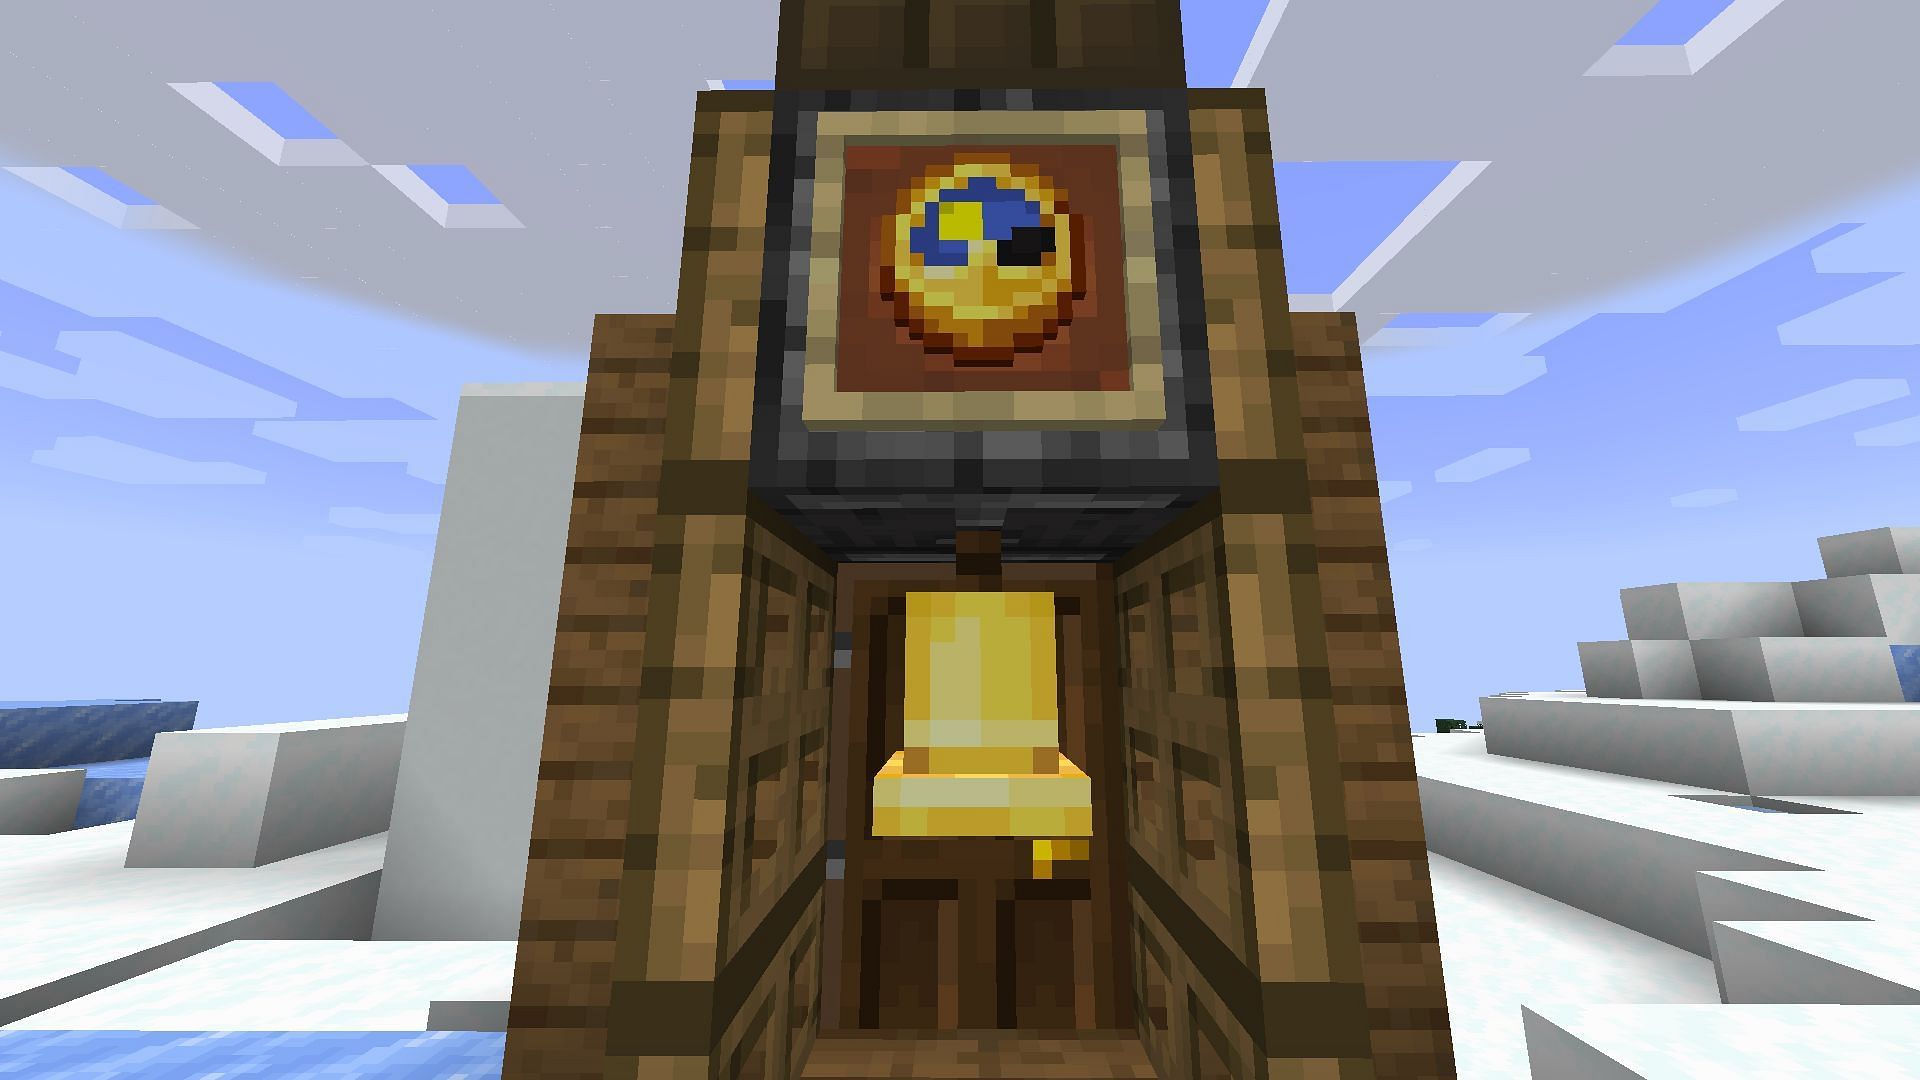 Clock can be used in some ways, but overall it is considered useless by many Minecraft players (Image via Mojang)